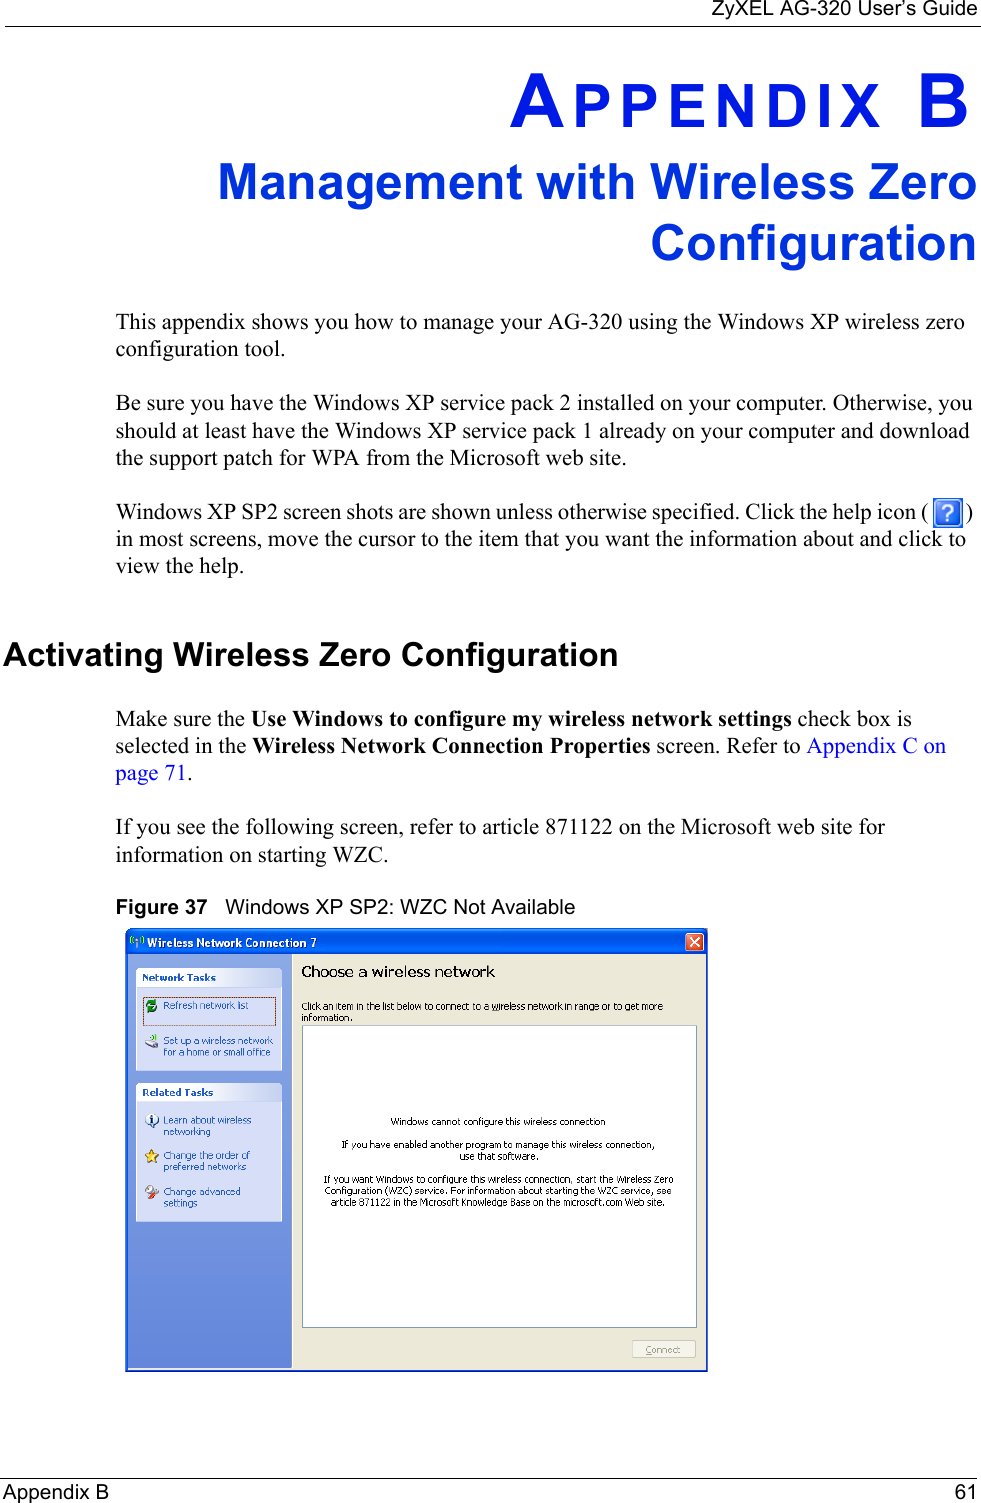 ZyXEL AG-320 User’s GuideAppendix B 61APPENDIX BManagement with Wireless ZeroConfigurationThis appendix shows you how to manage your AG-320 using the Windows XP wireless zero configuration tool.Be sure you have the Windows XP service pack 2 installed on your computer. Otherwise, you should at least have the Windows XP service pack 1 already on your computer and download the support patch for WPA from the Microsoft web site.Windows XP SP2 screen shots are shown unless otherwise specified. Click the help icon ( ) in most screens, move the cursor to the item that you want the information about and click to view the help.Activating Wireless Zero ConfigurationMake sure the Use Windows to configure my wireless network settings check box is selected in the Wireless Network Connection Properties screen. Refer to Appendix C on page 71.If you see the following screen, refer to article 871122 on the Microsoft web site for information on starting WZC.Figure 37   Windows XP SP2: WZC Not Available